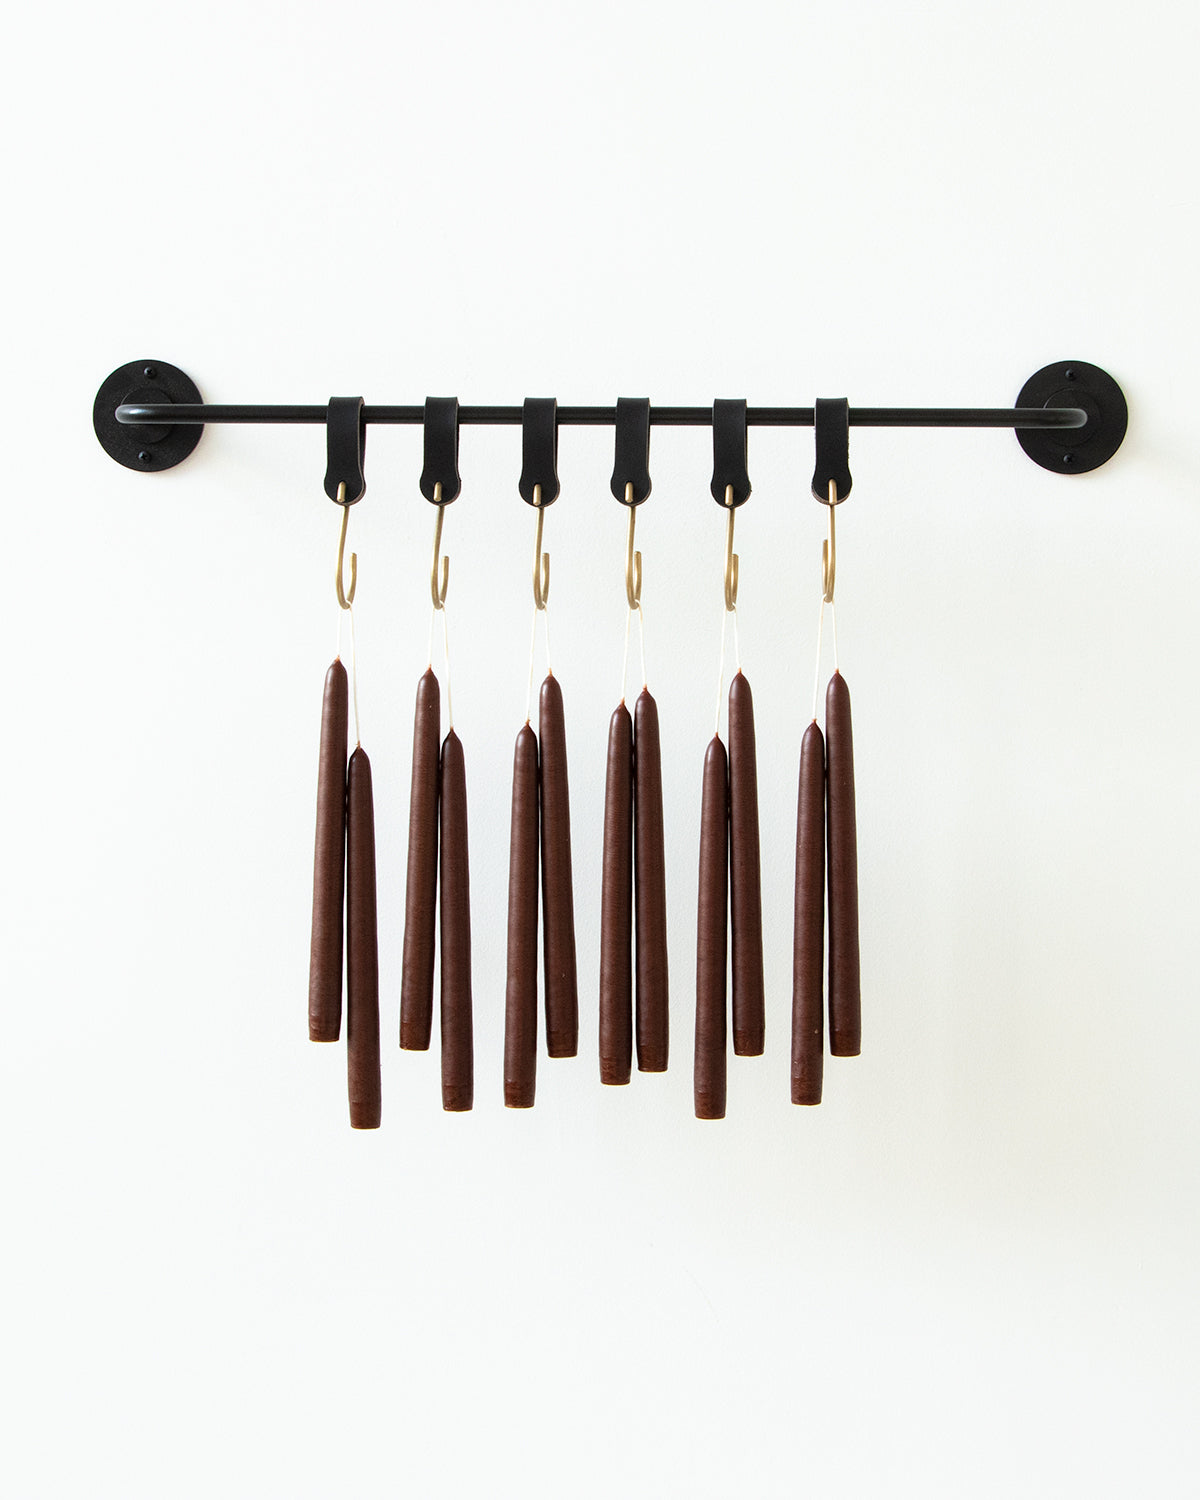 A dozen chestnut brown taper candles hanging in pairs from black leather hooks from a black wall pot rack.